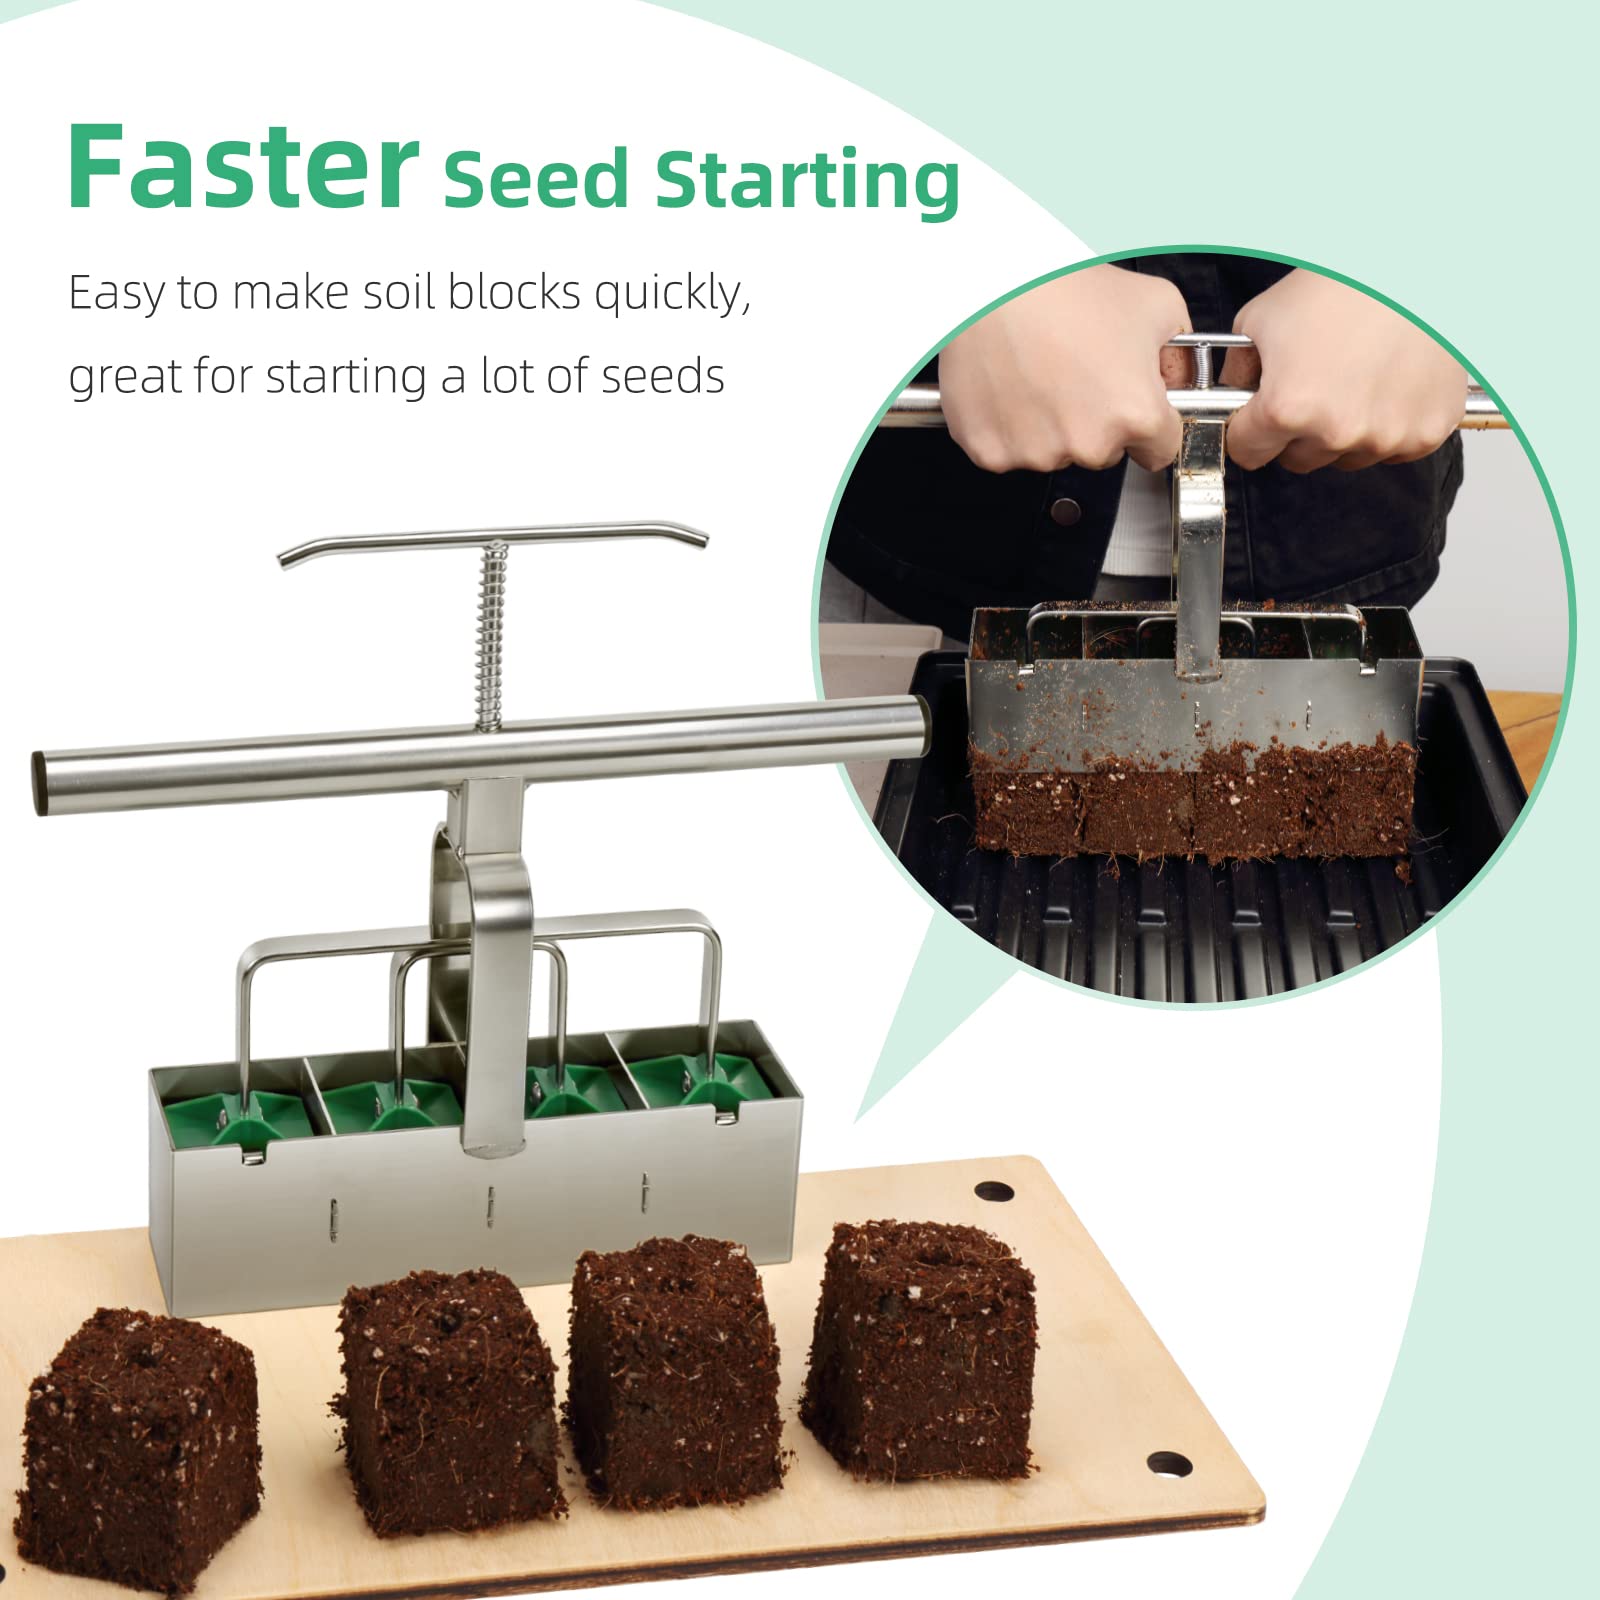 Soil Blocker with Comfortable Handle, 4 Cell Soil Block Maker 2 Inch Mold Blocking Tool for Seed Starting Germination, Grow Seedling No Transplant Shock